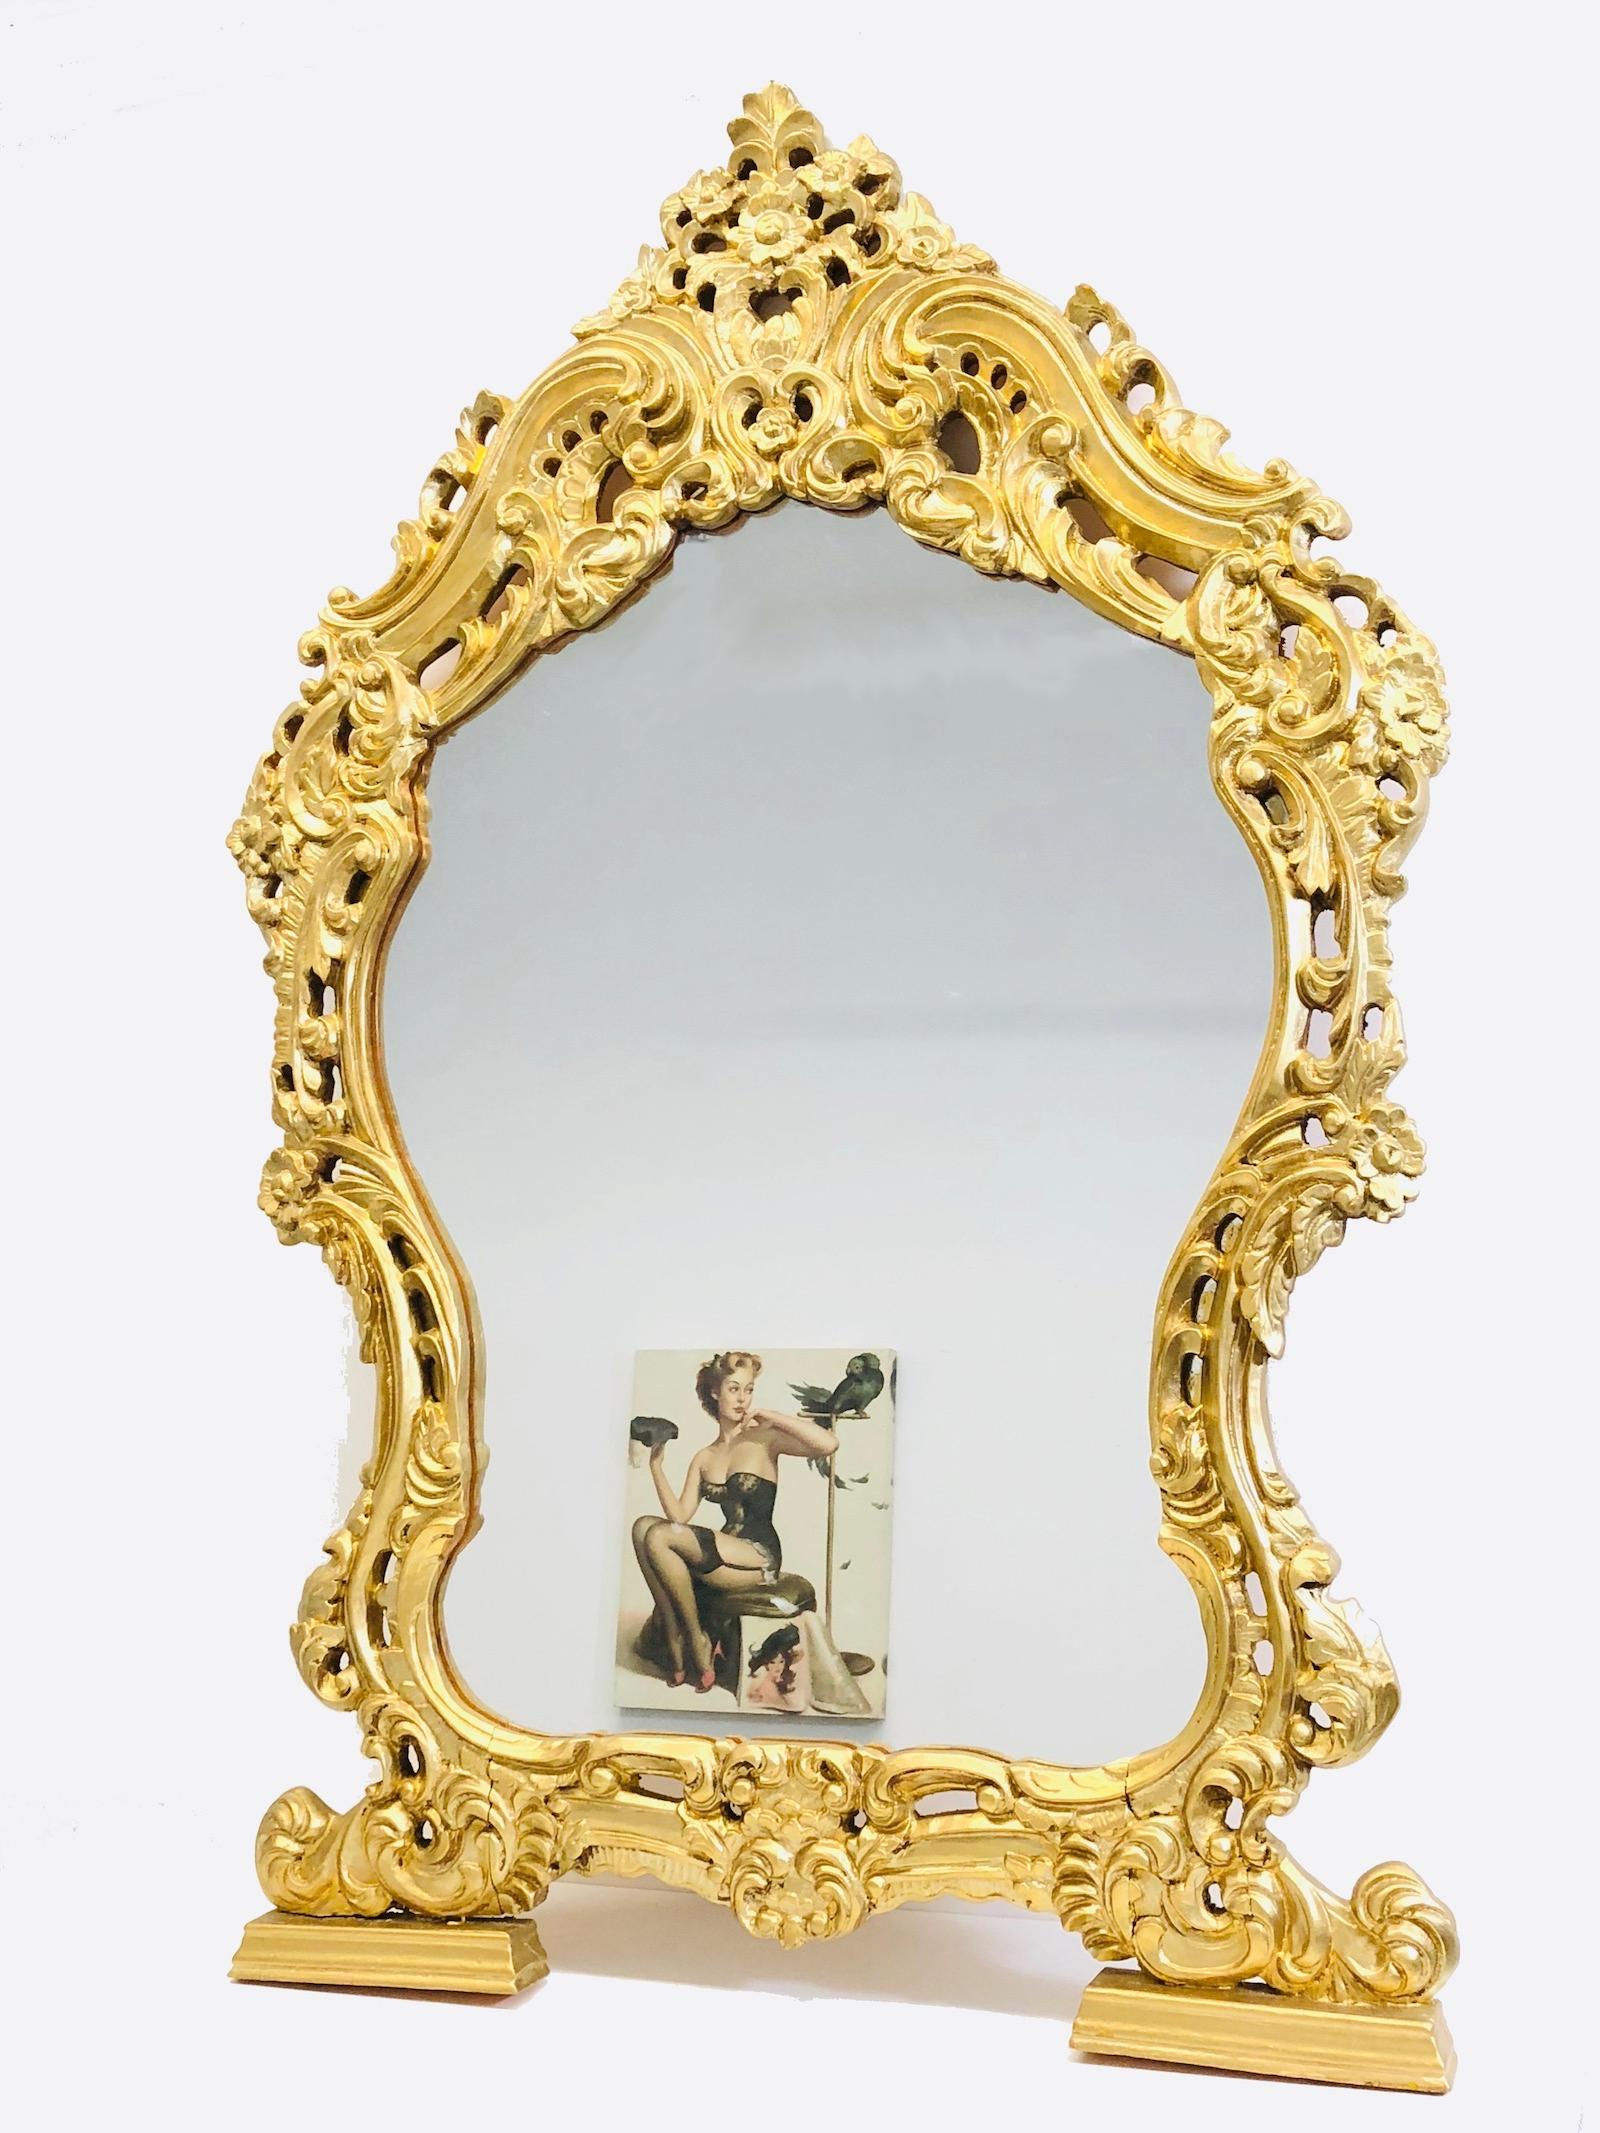 Stunning large Hollywood Regency style carved mirror. The giltwood frame surrounds a glass mirror. Made in Italy.